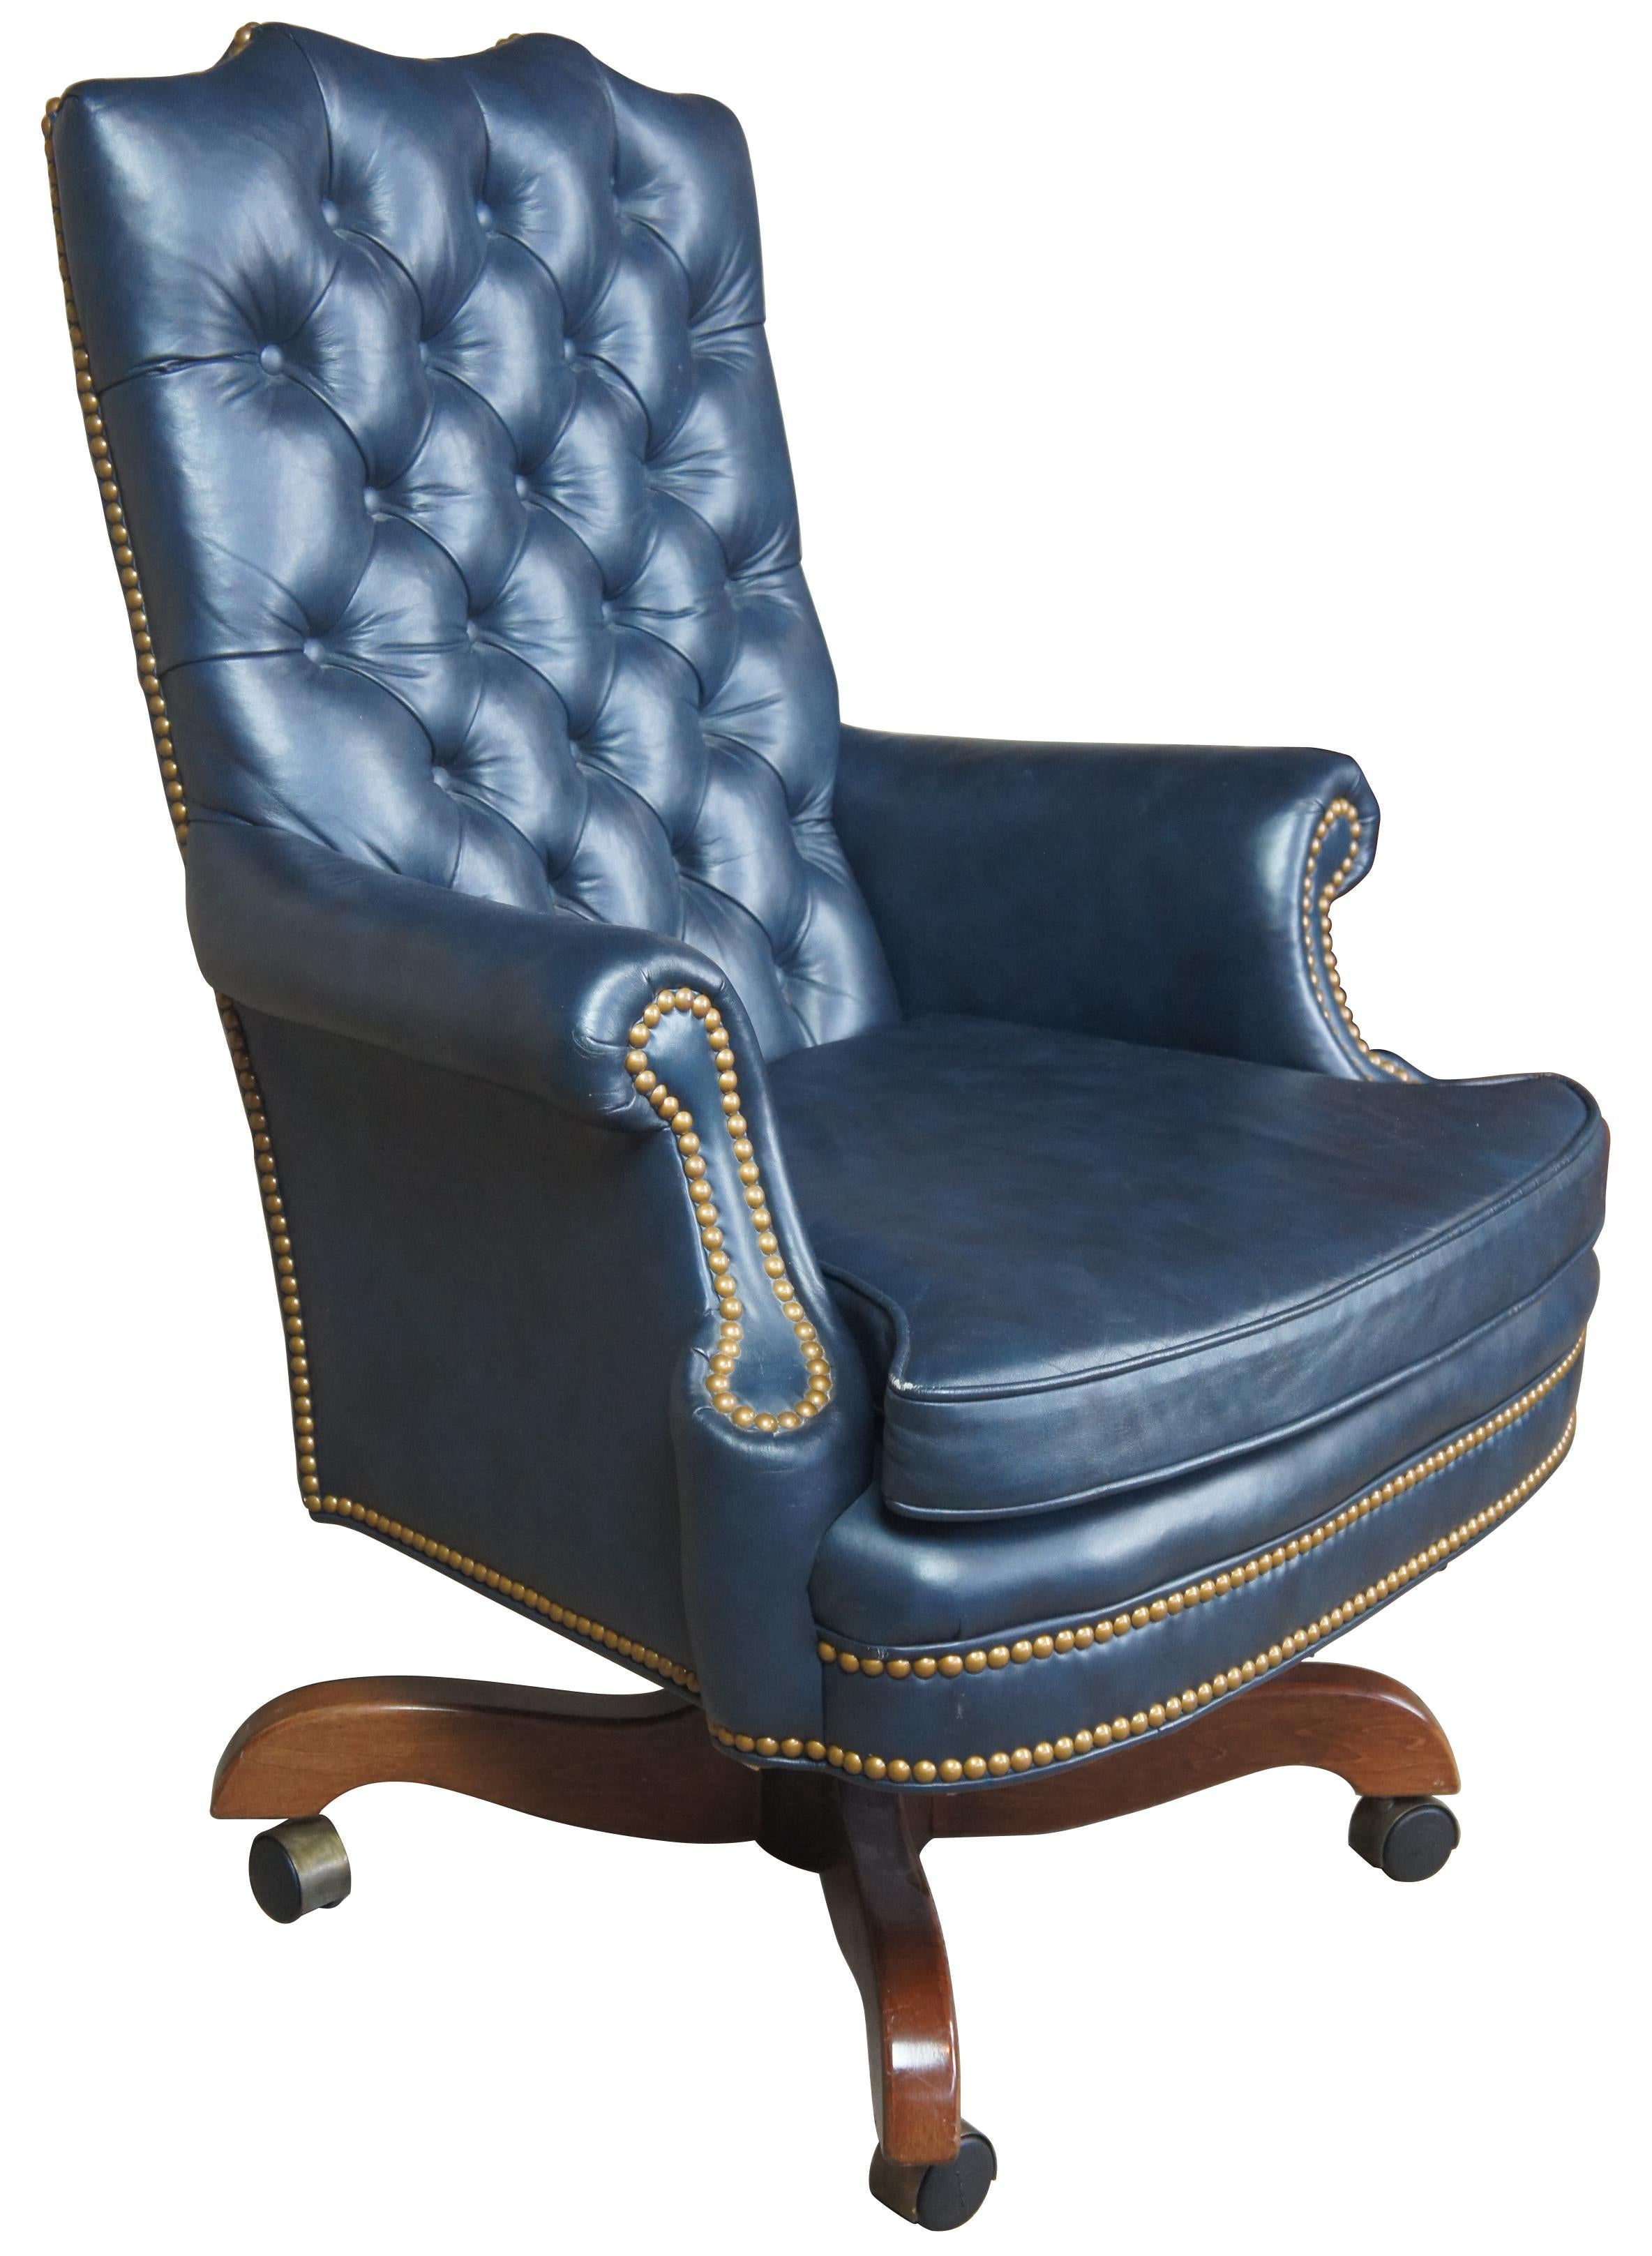 North Hickory Furniture Company. Tufted leather executive office chair. Blue with brass nailhead trim.
 